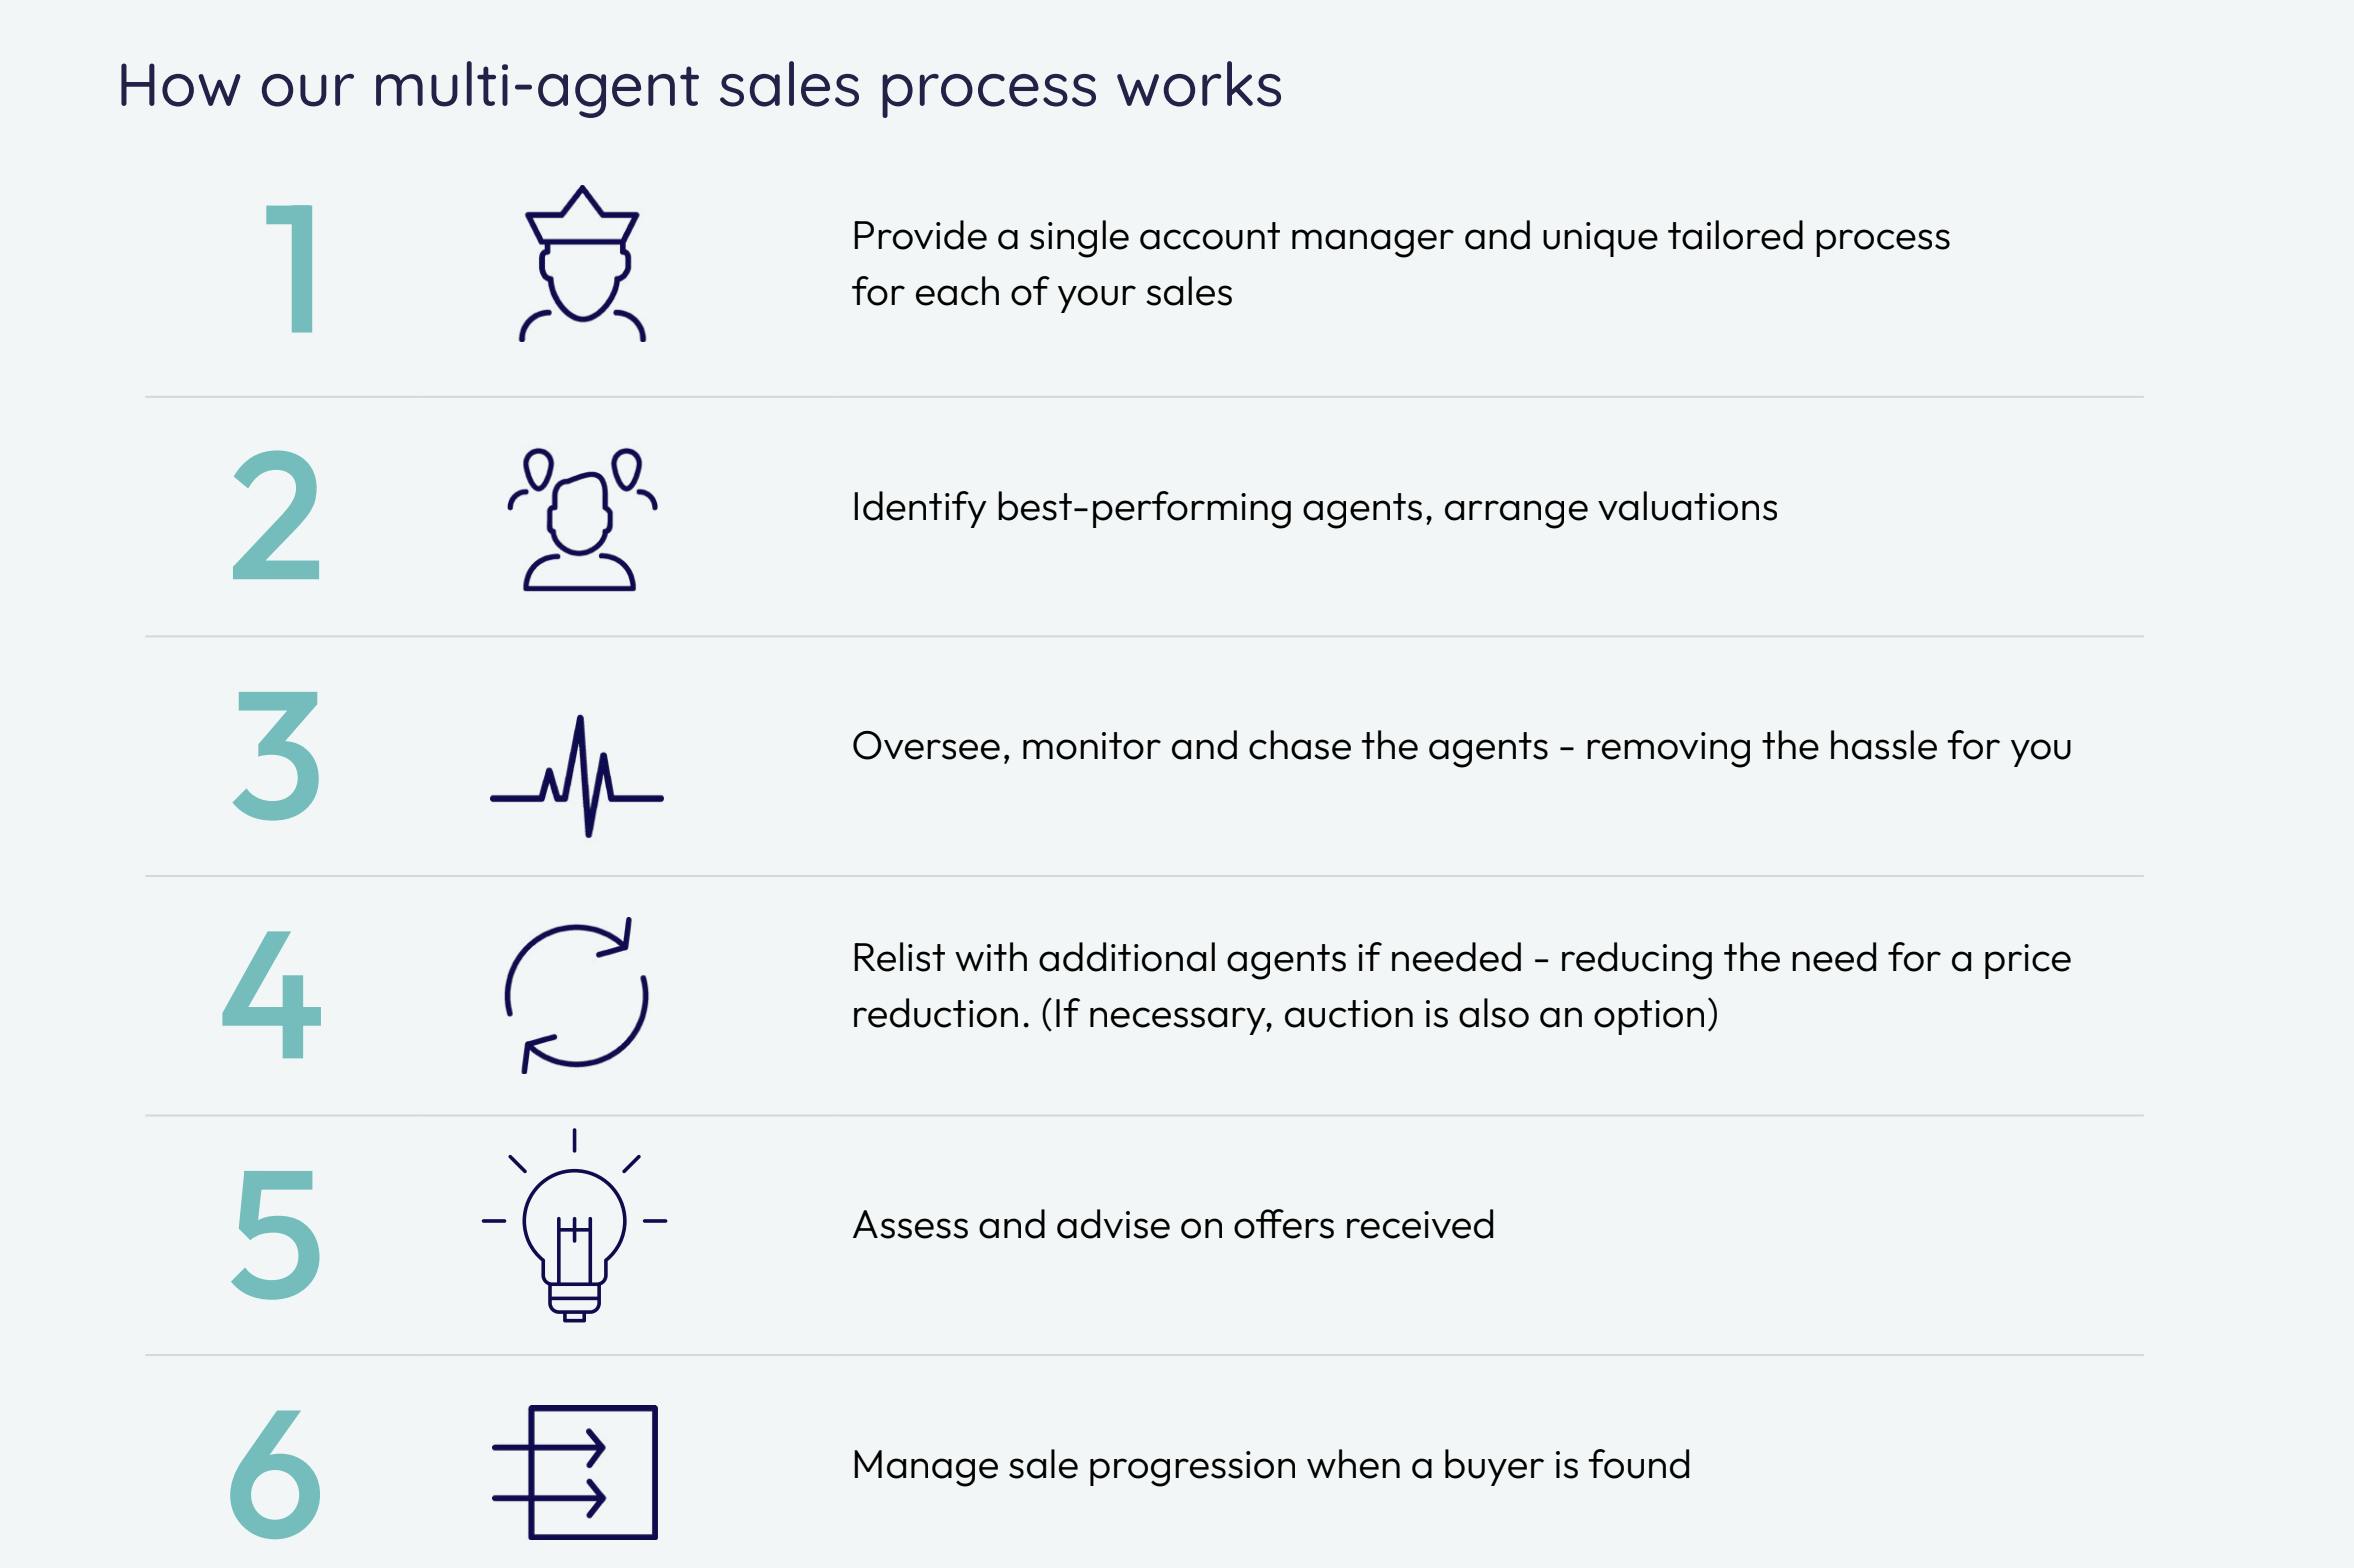 How our multi-agent sales process works